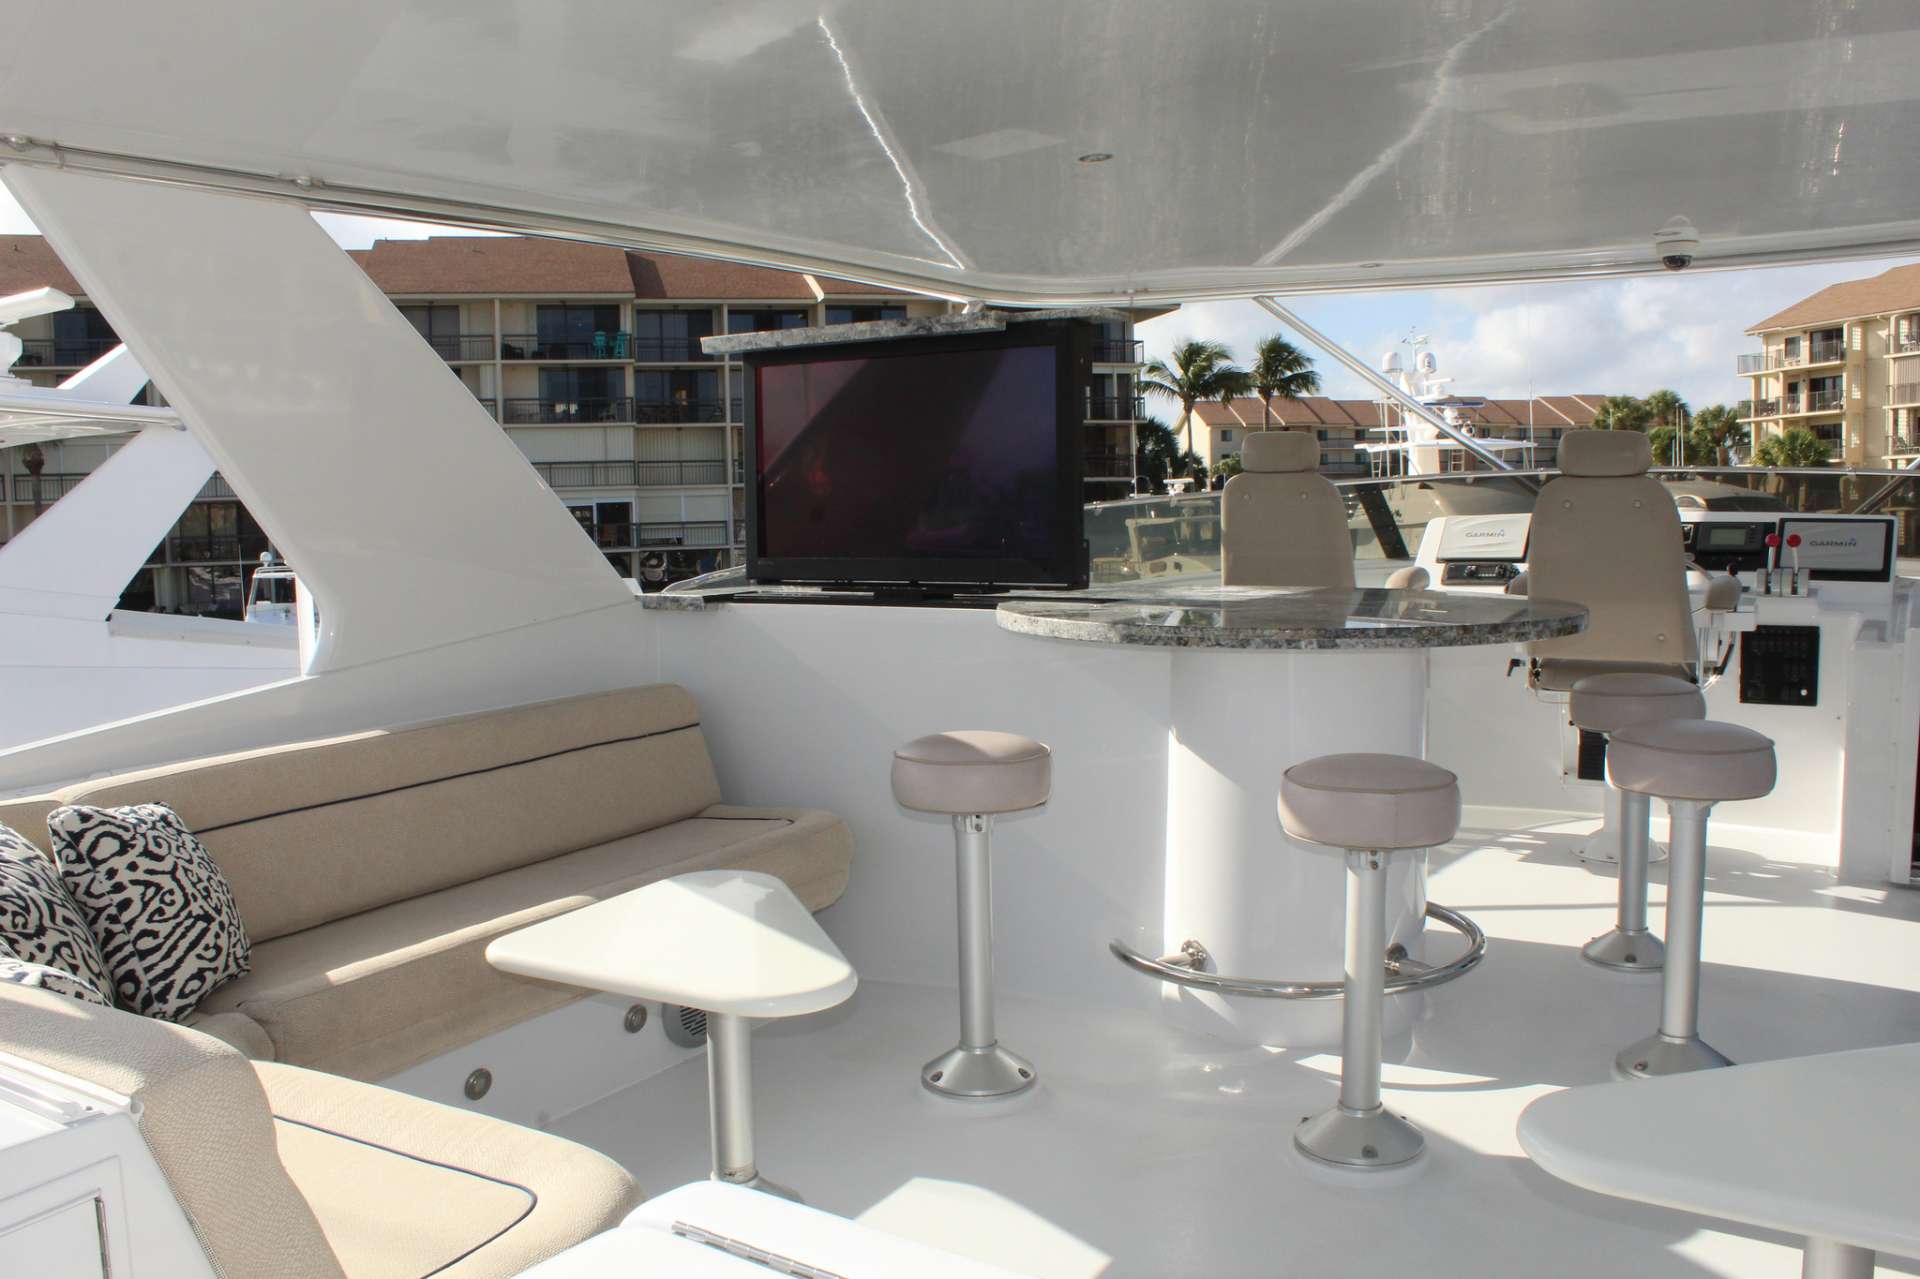 Motor Yacht 'ISLAND GIRL' Aft cockpit dining table, 6 PAX, 2 Crew, 75.00 Ft, 22.00 Meters, Built 2002, Hatteras, Refit Year 2018